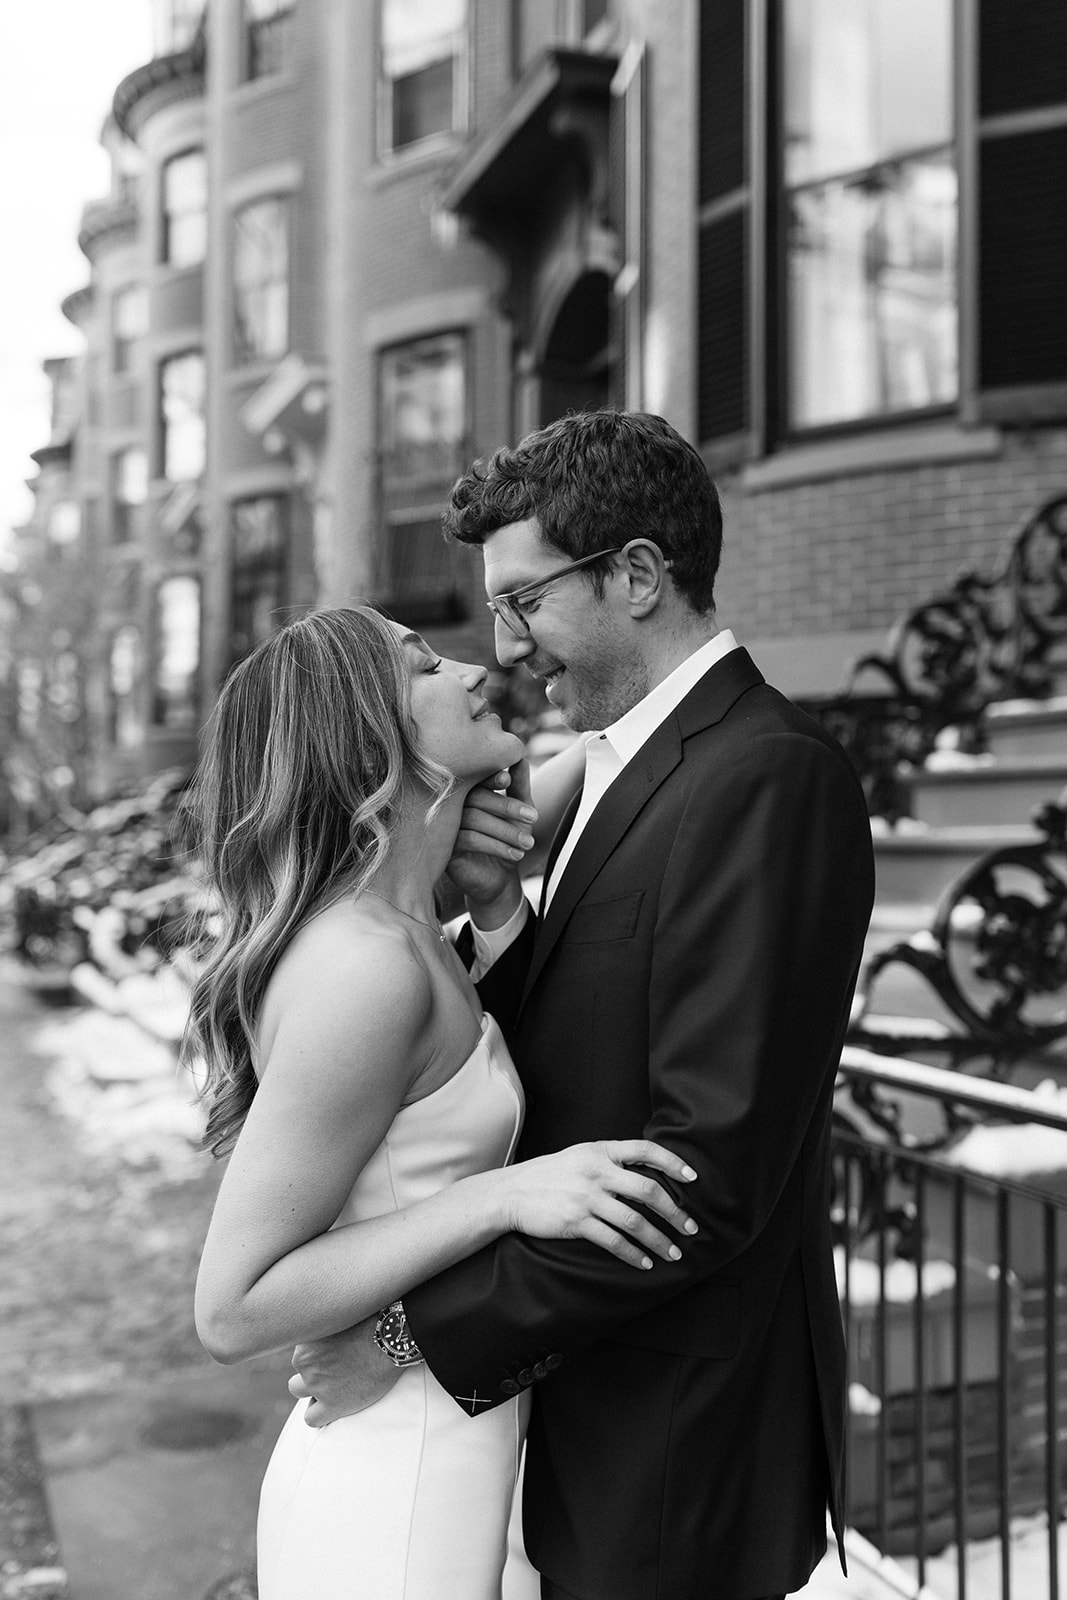 stunning bride and groom pose on the Boston streets after their dreamy winter elopement day!